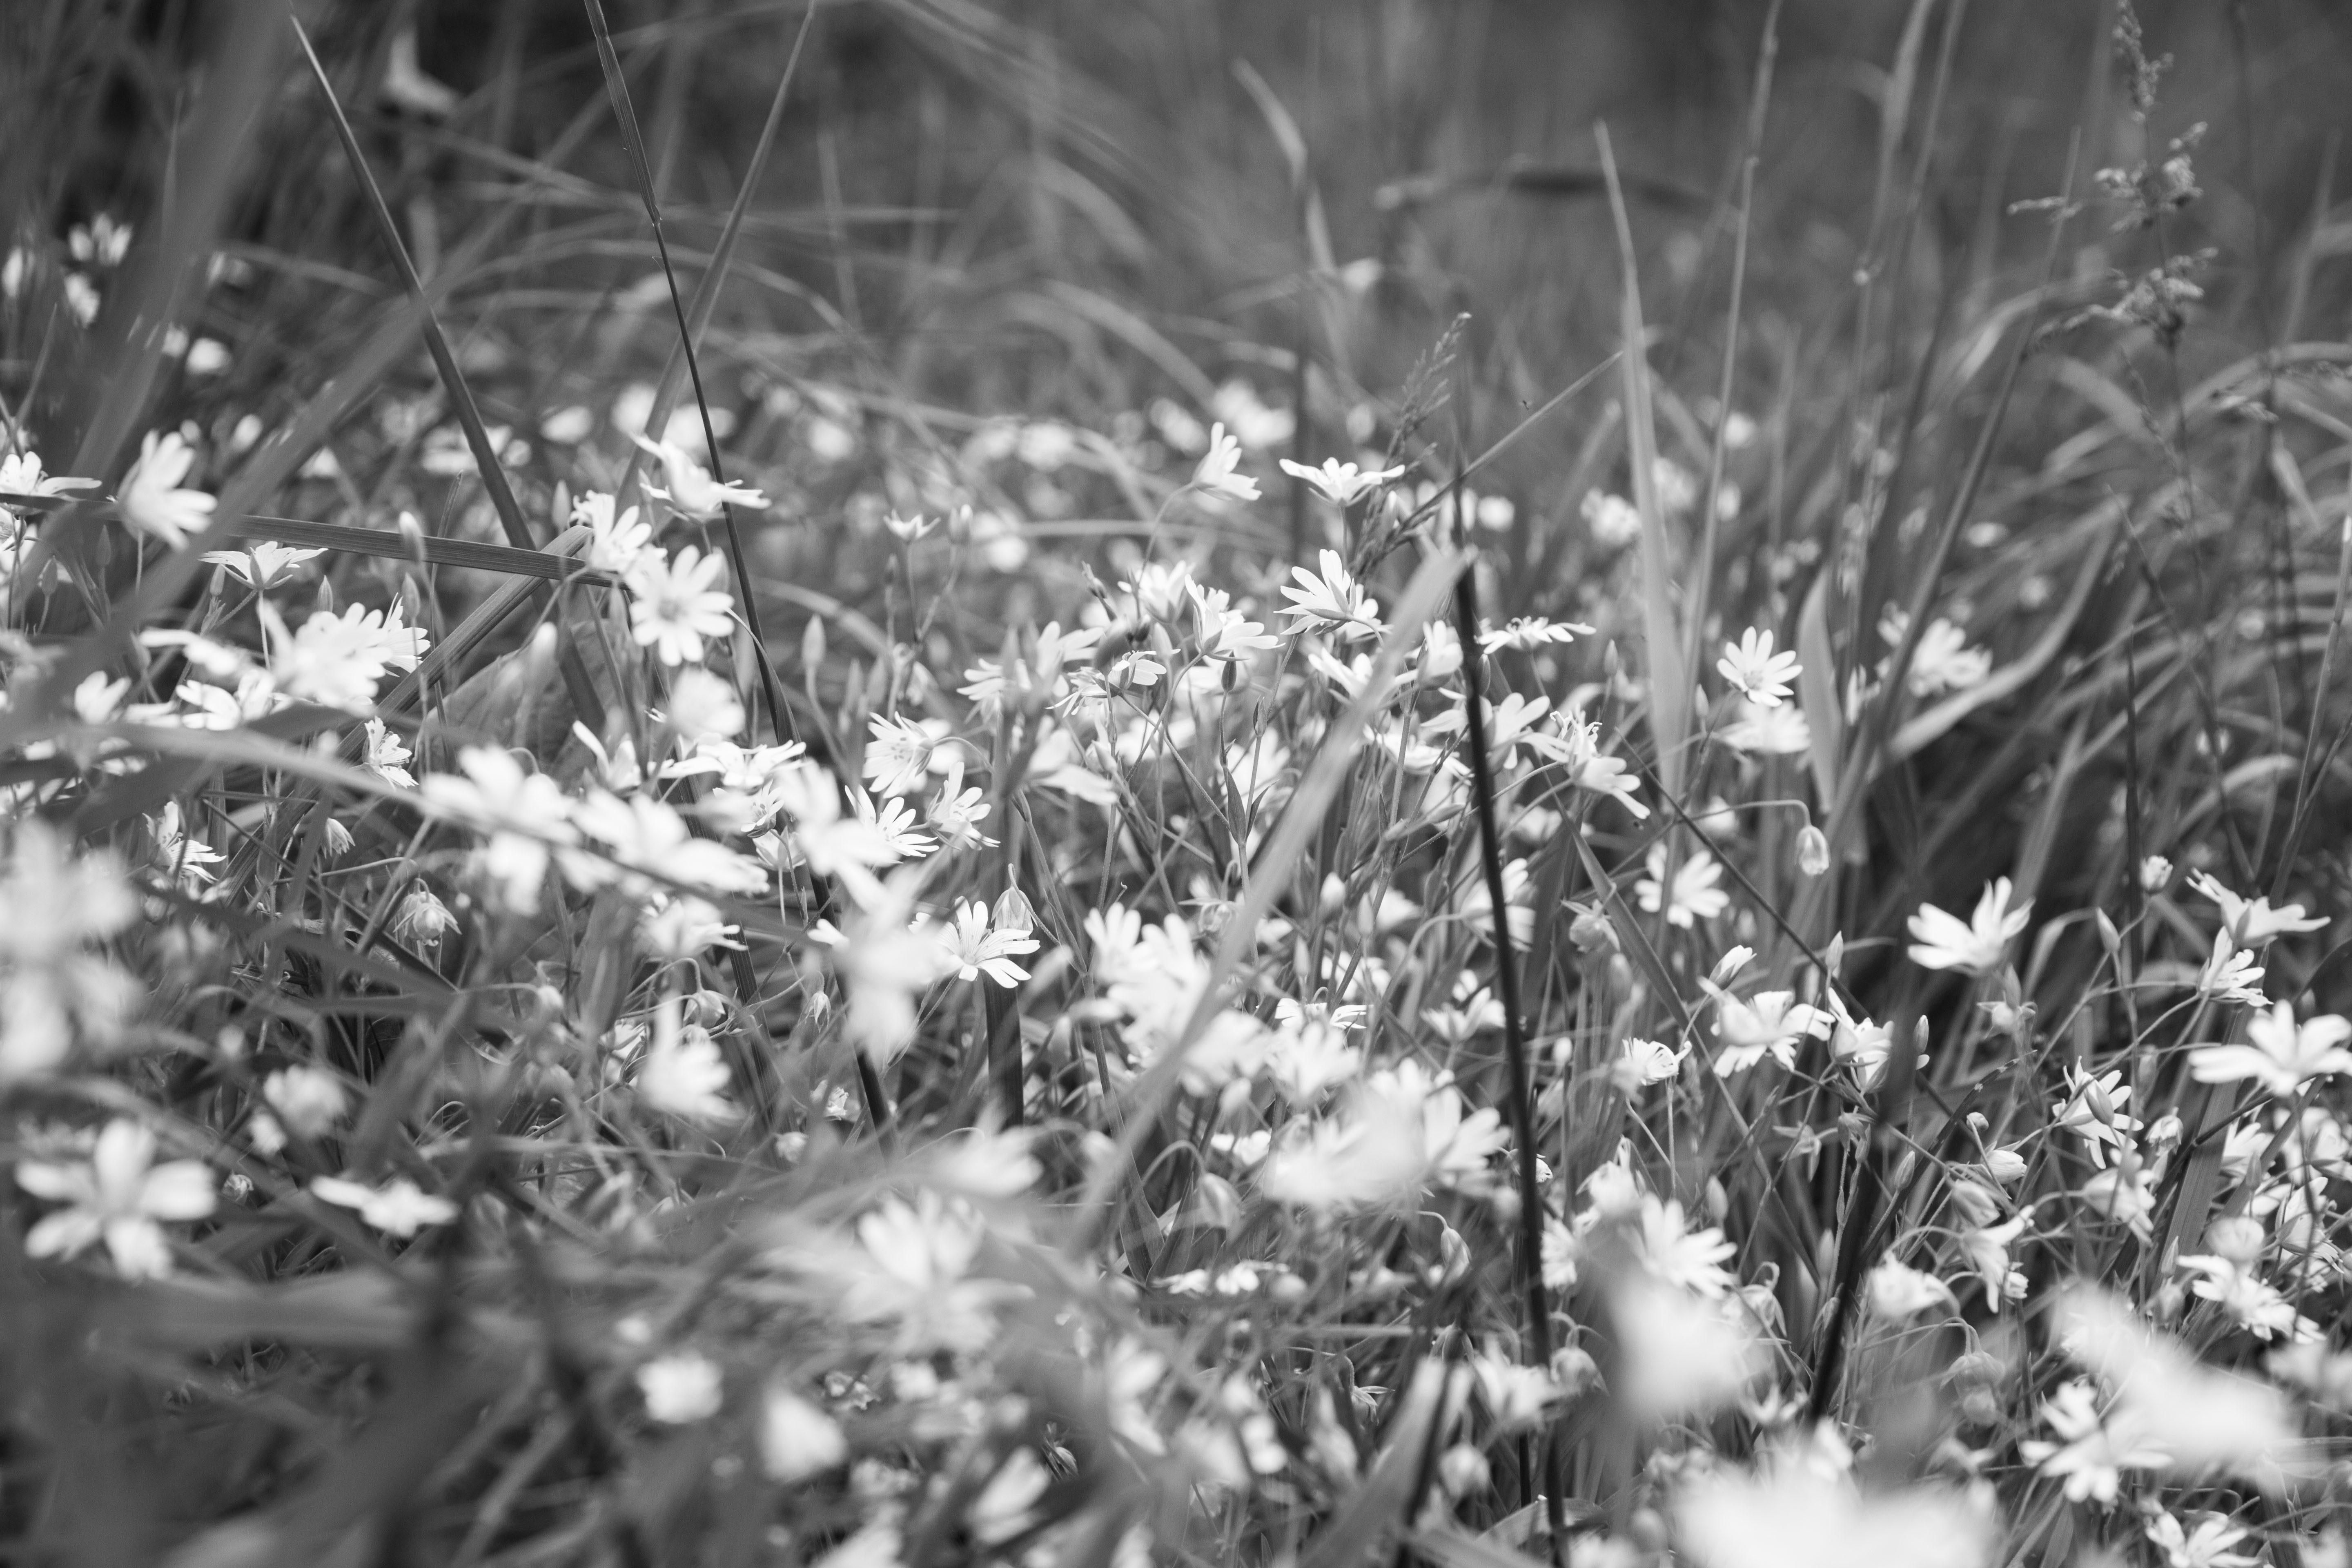 Black And White, Black, White, Flower, nature, no people